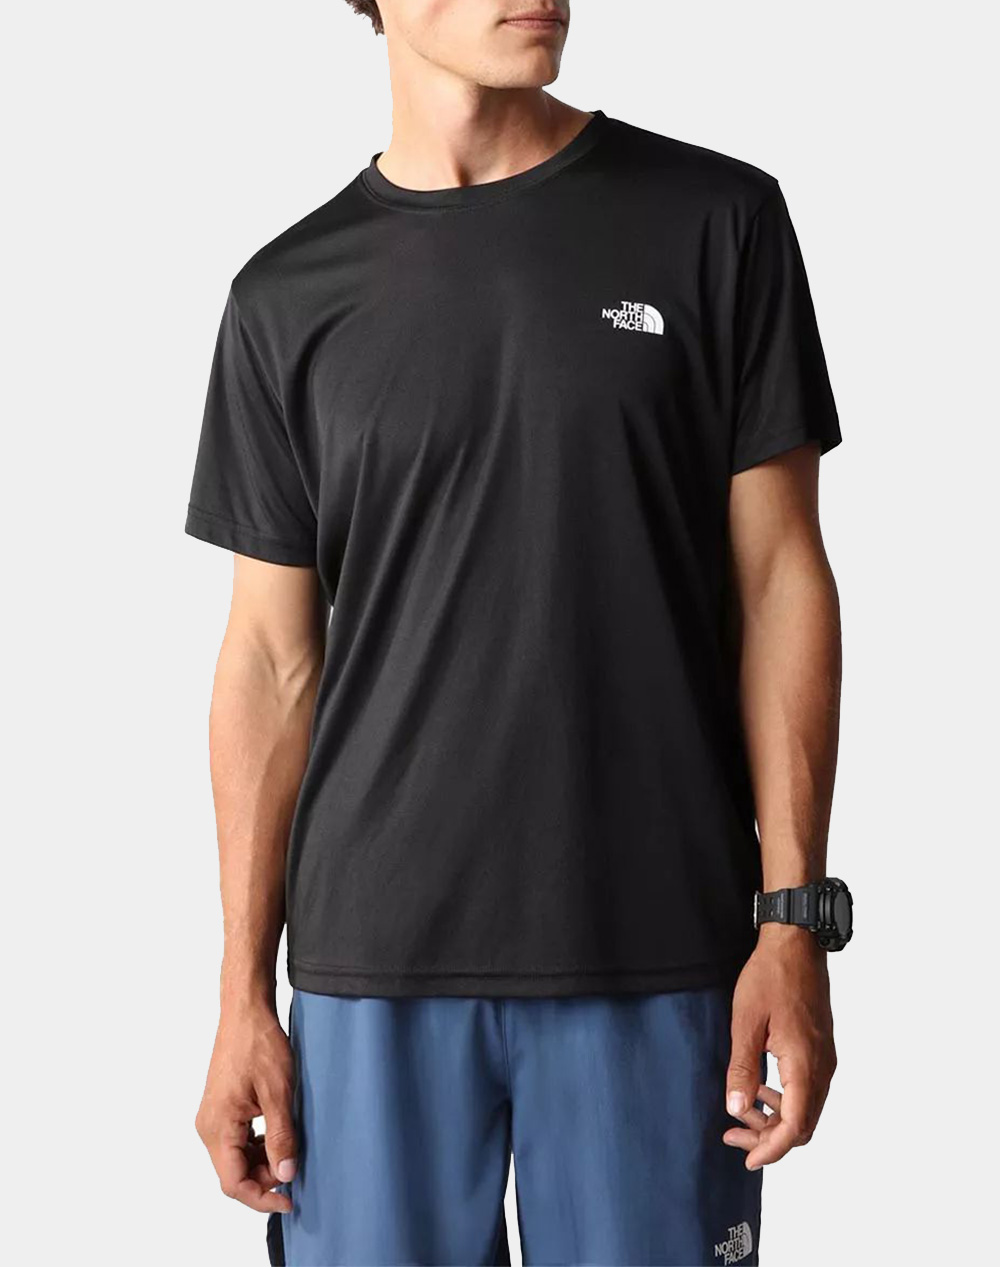 THE NORTH FACE M REAXION AMP CREW NF0A3RX3-NFJK3 Black 3820ATNFA3400020_XR22063